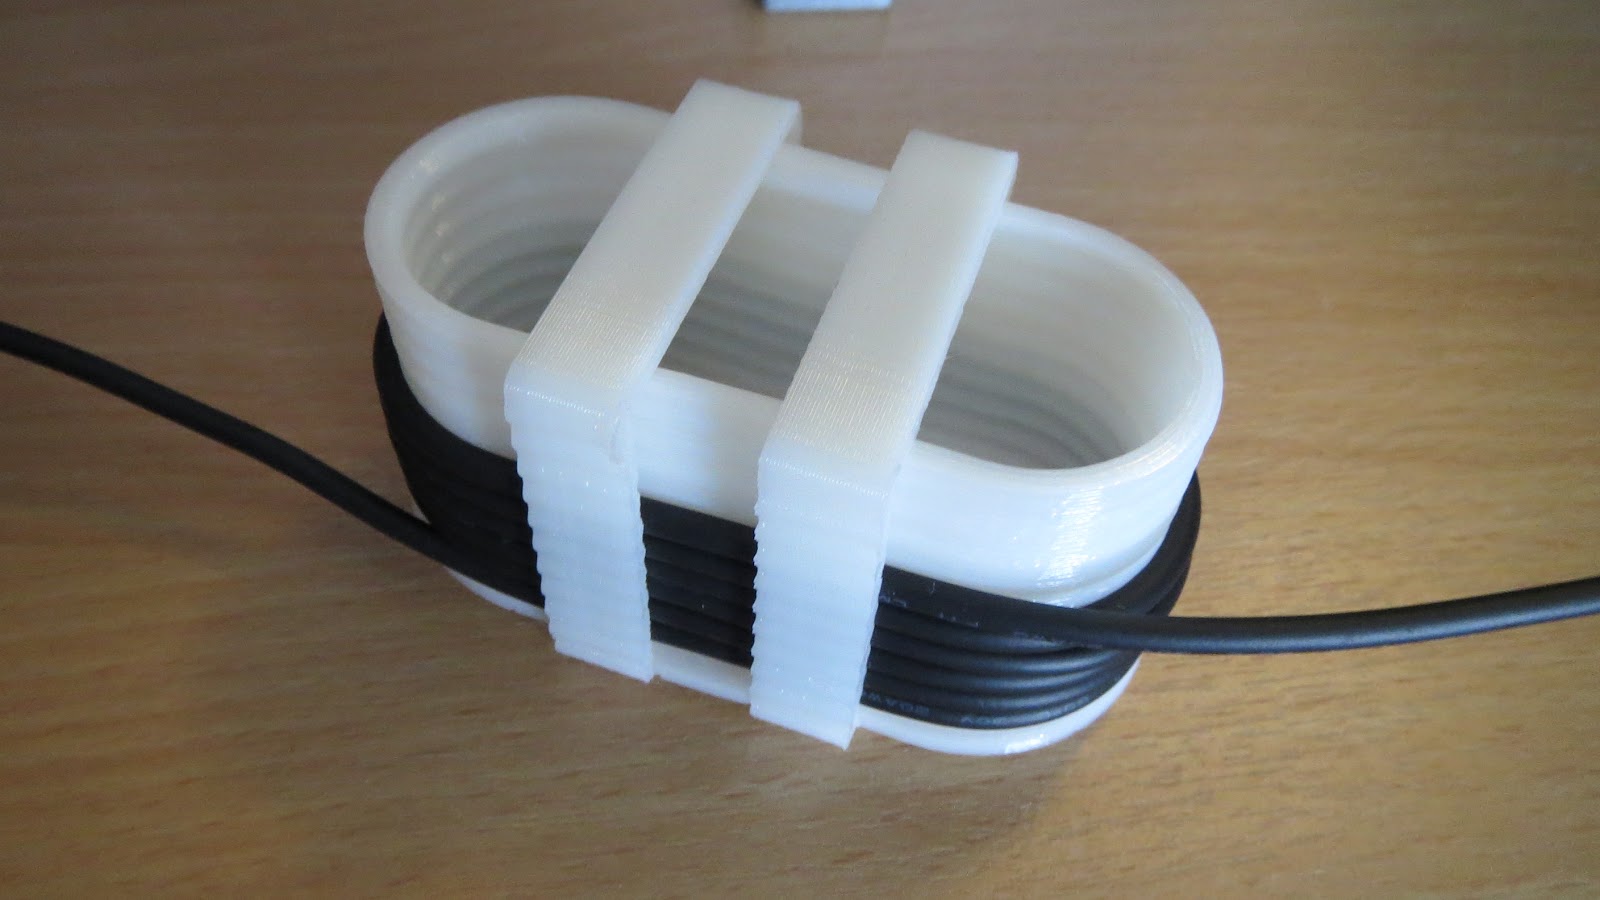 3D printed wire tidying spool